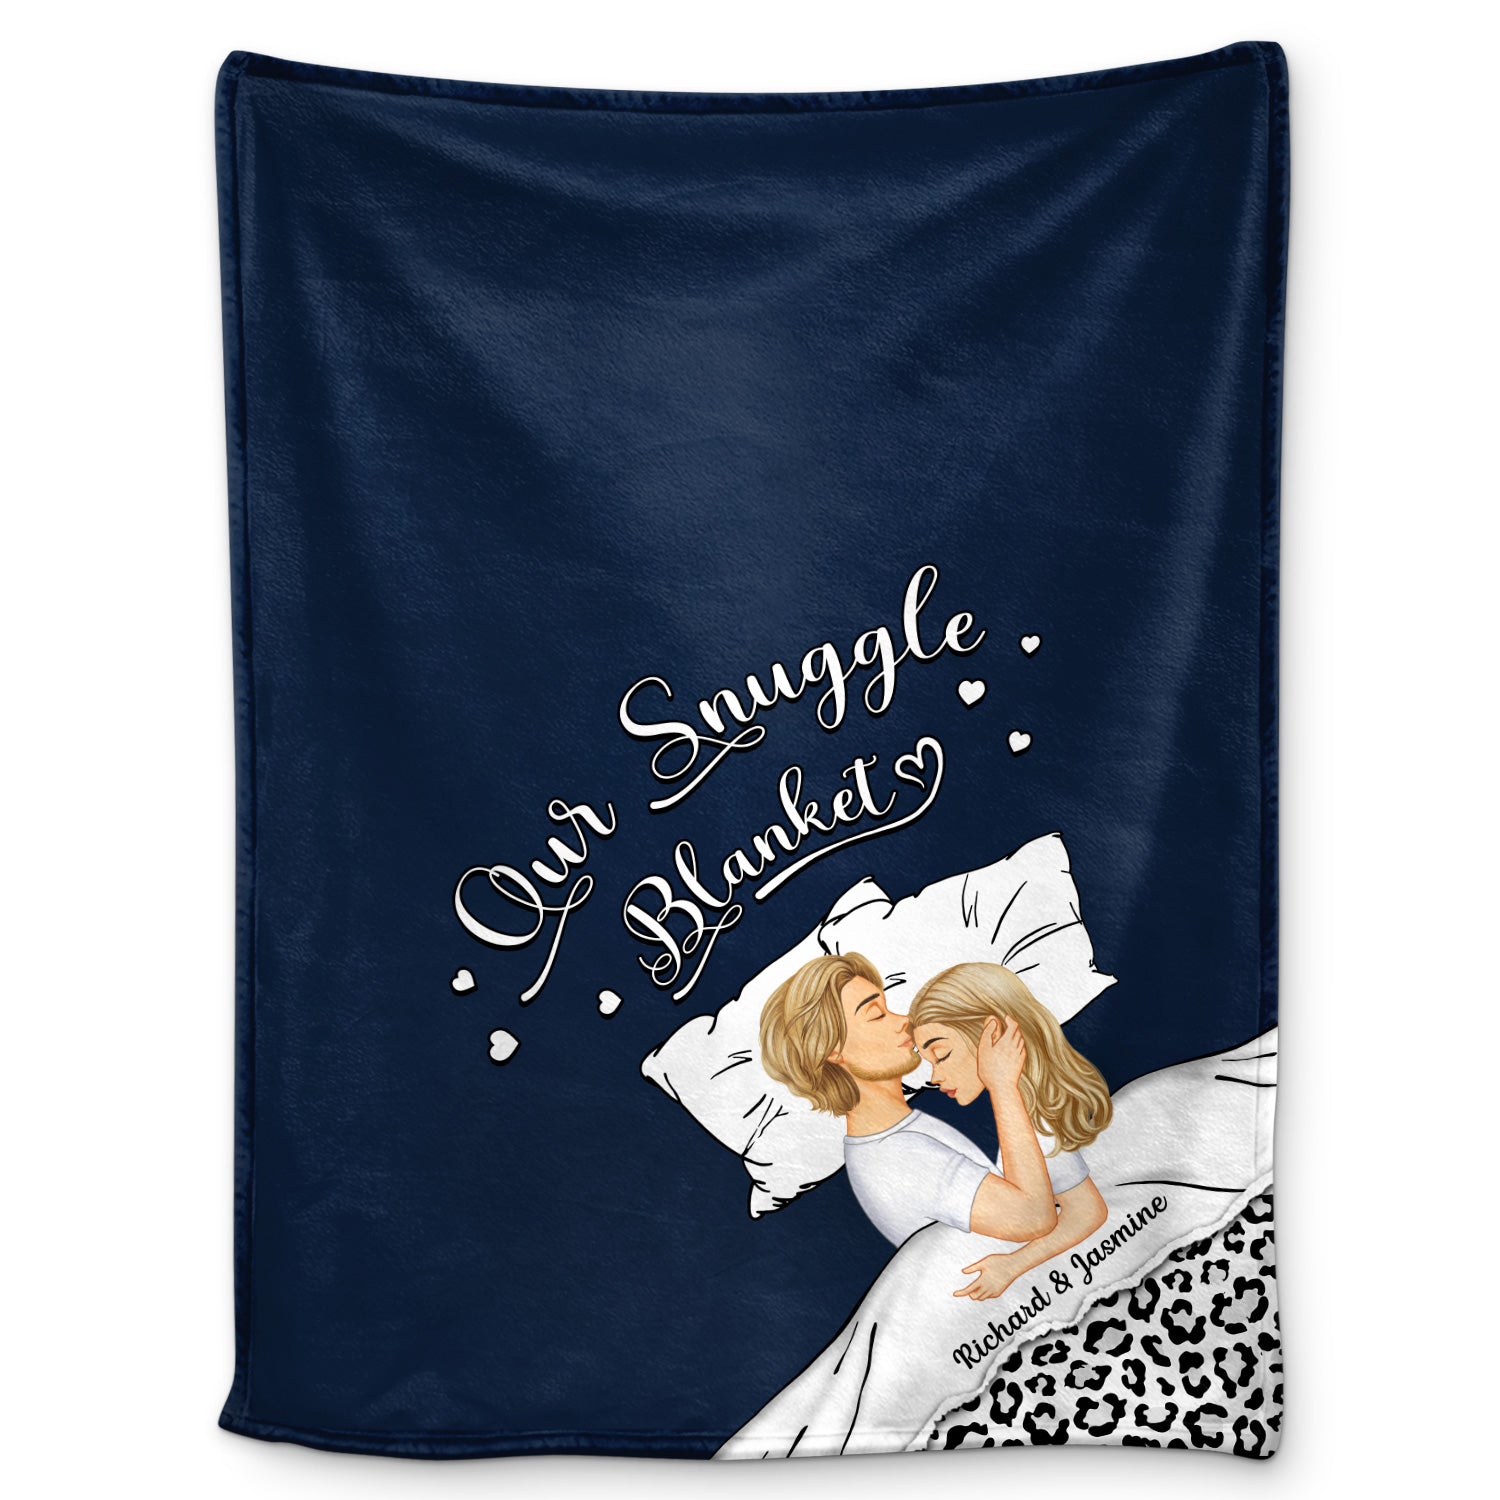 Couple Side View Our Snuggle Blanket - Gift For Couple - Personalized Custom Fleece Blanket